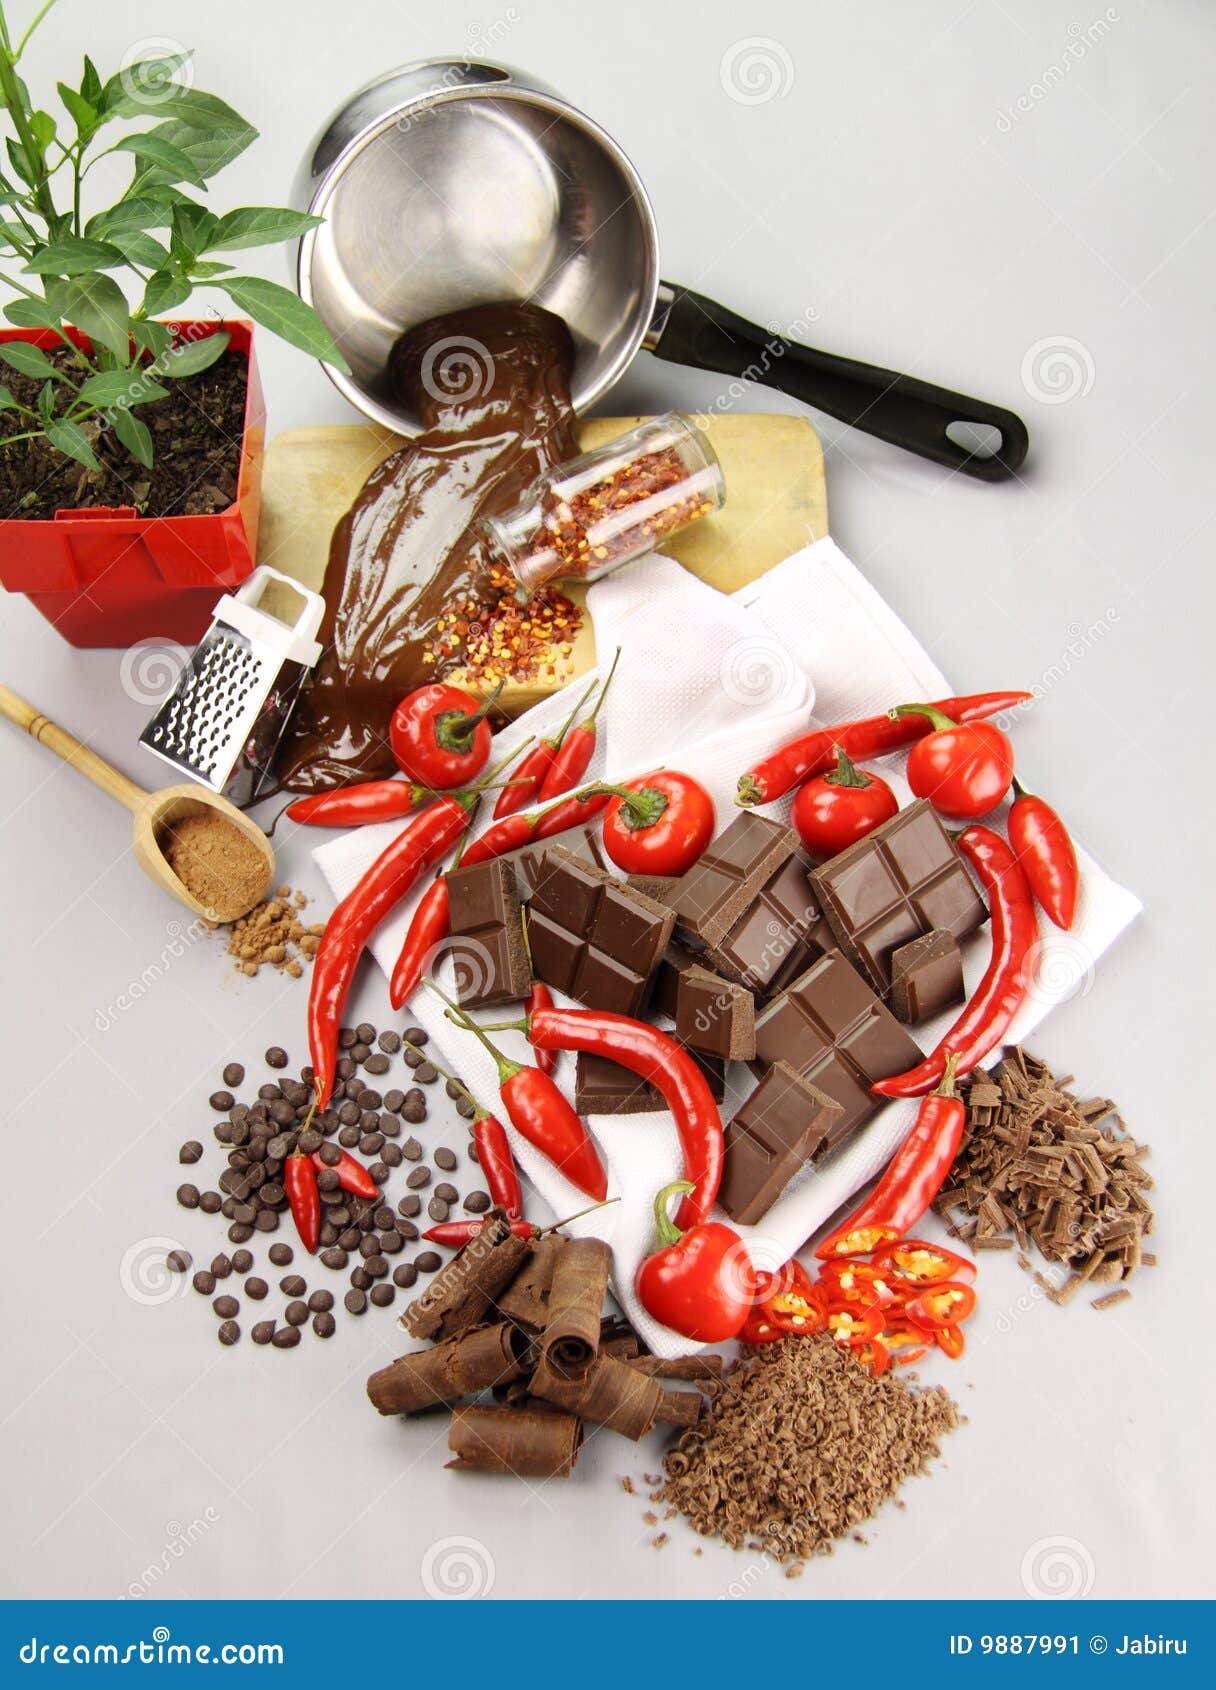 40+ Chocolate Bitter Grater Kitchen Utensil Stock Photos, Pictures